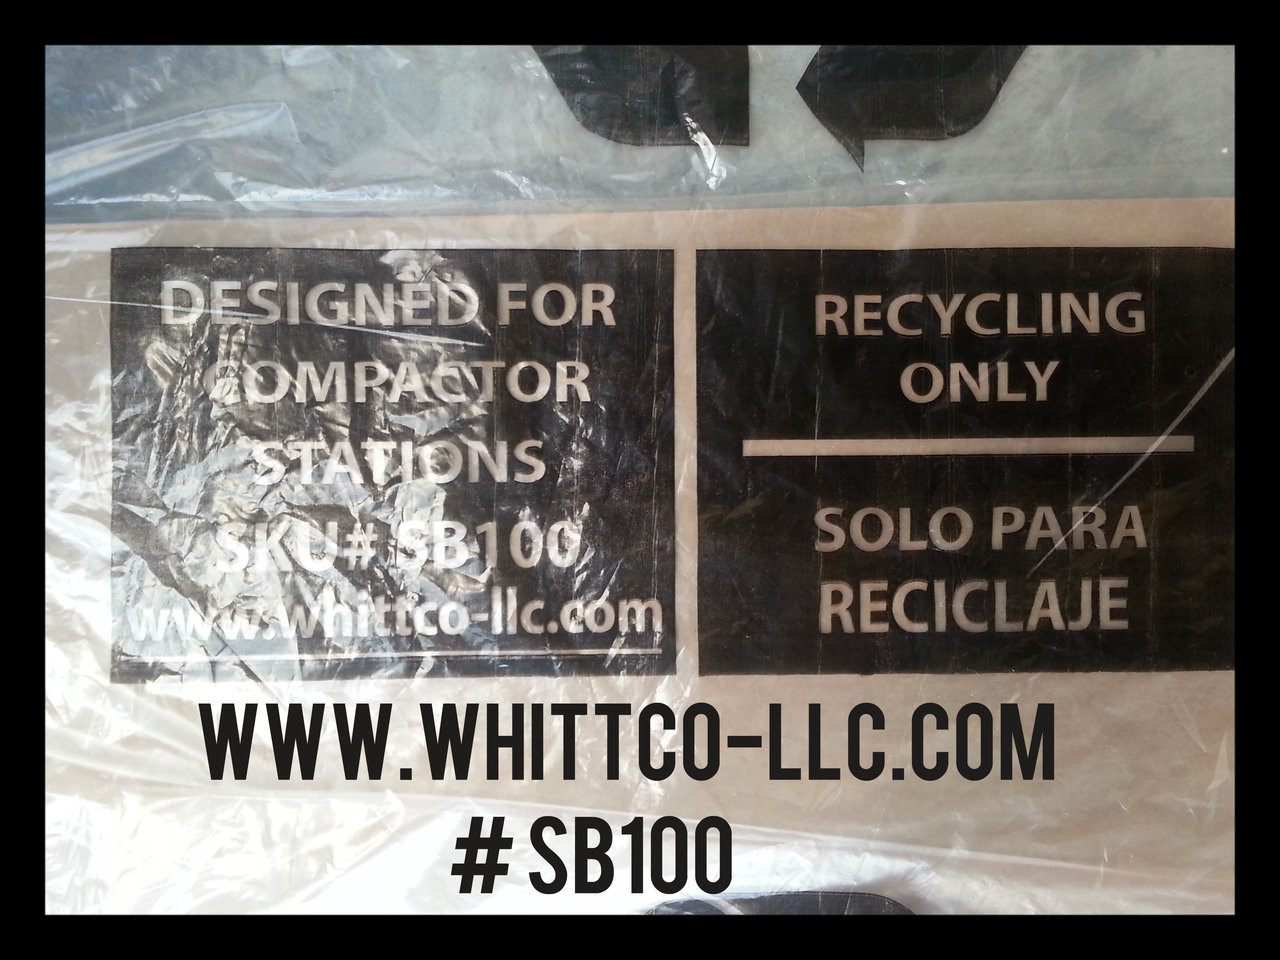 https://cdn11.bigcommerce.com/s-tfh34o/images/stencil/1280x1280/products/61058/112927/smart_belly_SB100_clear_recycling_bags__56283.1411009246.jpg?c=2?imbypass=on